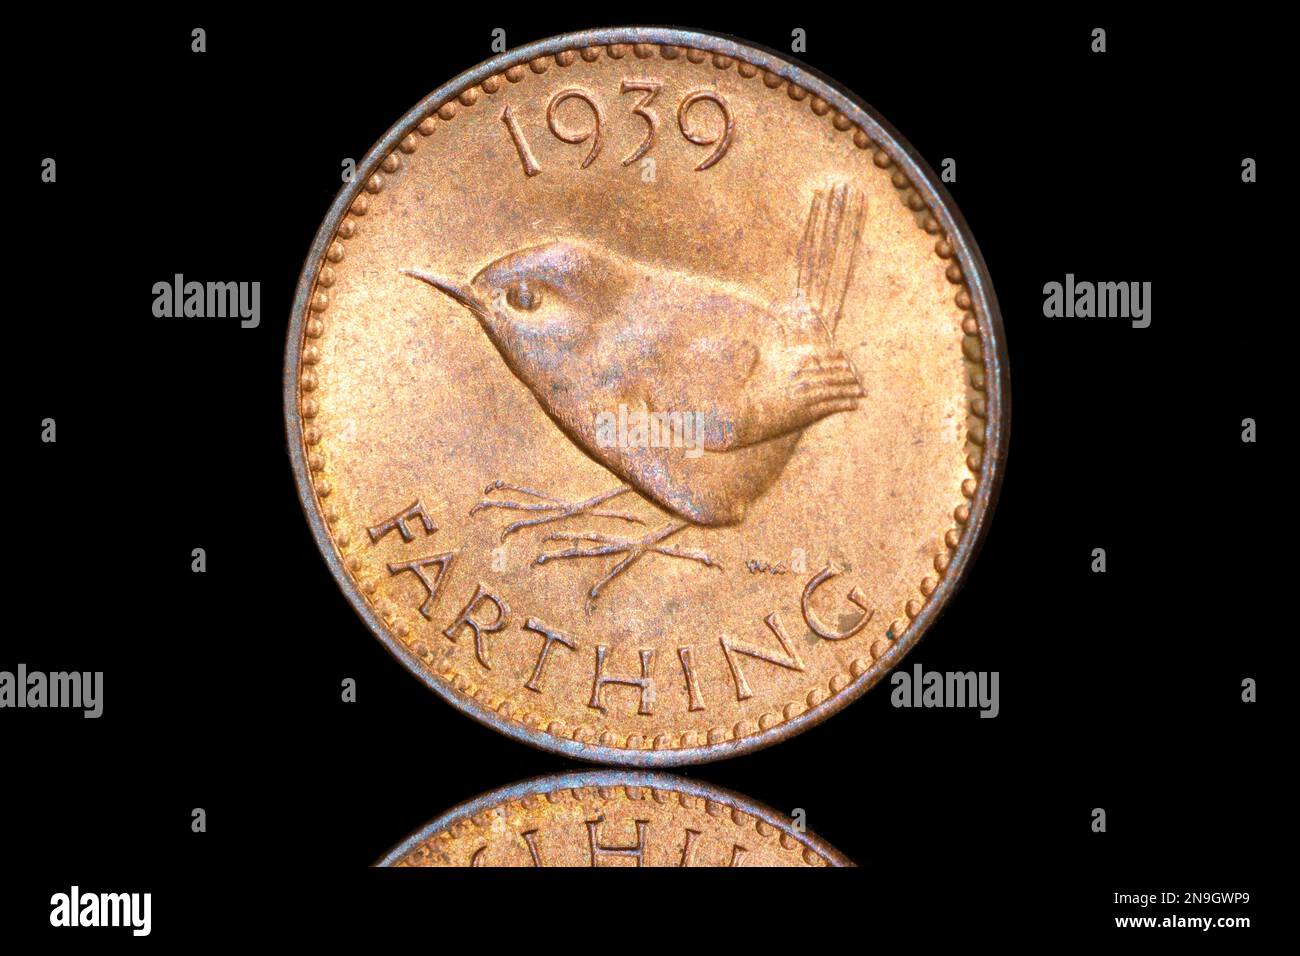 Reverse side of a 1939 George VI Farthing coin featuring a Wren Stock Photo